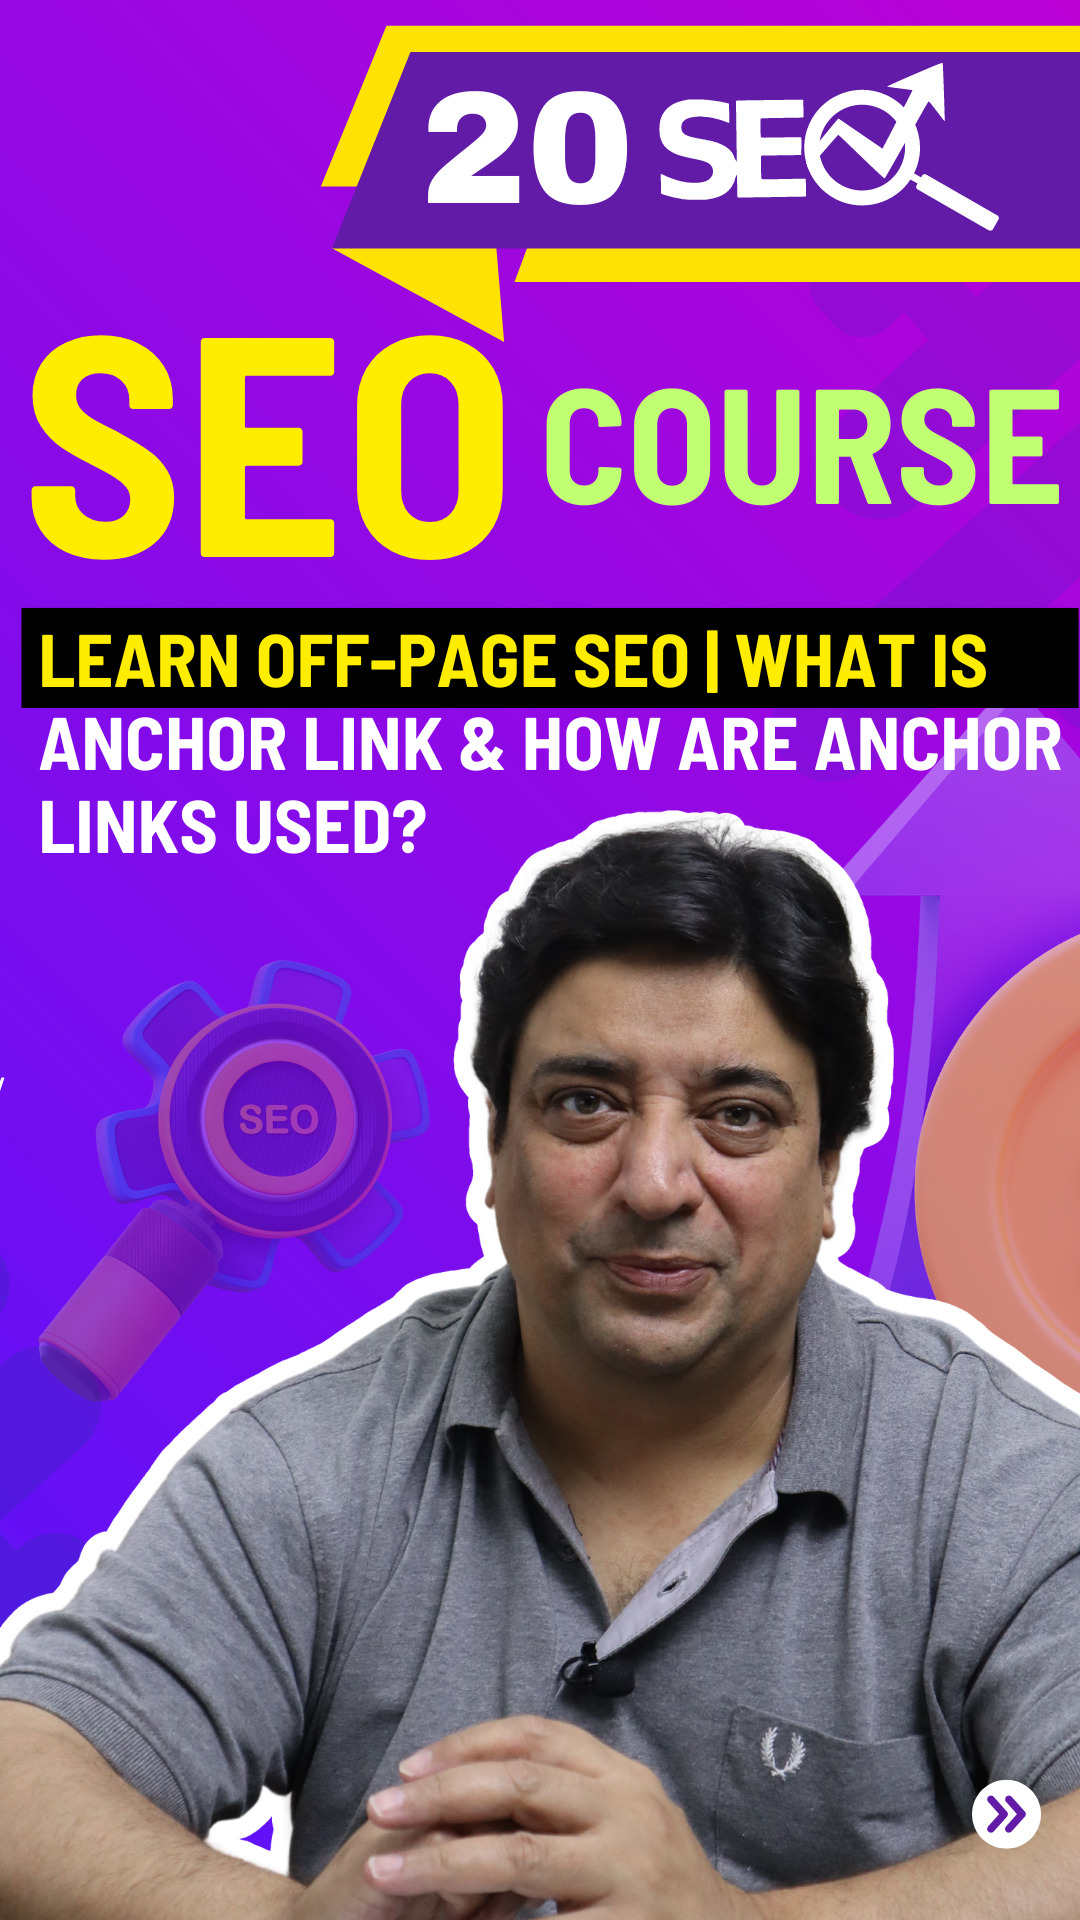 What is the Anchor link and how are anchor links used